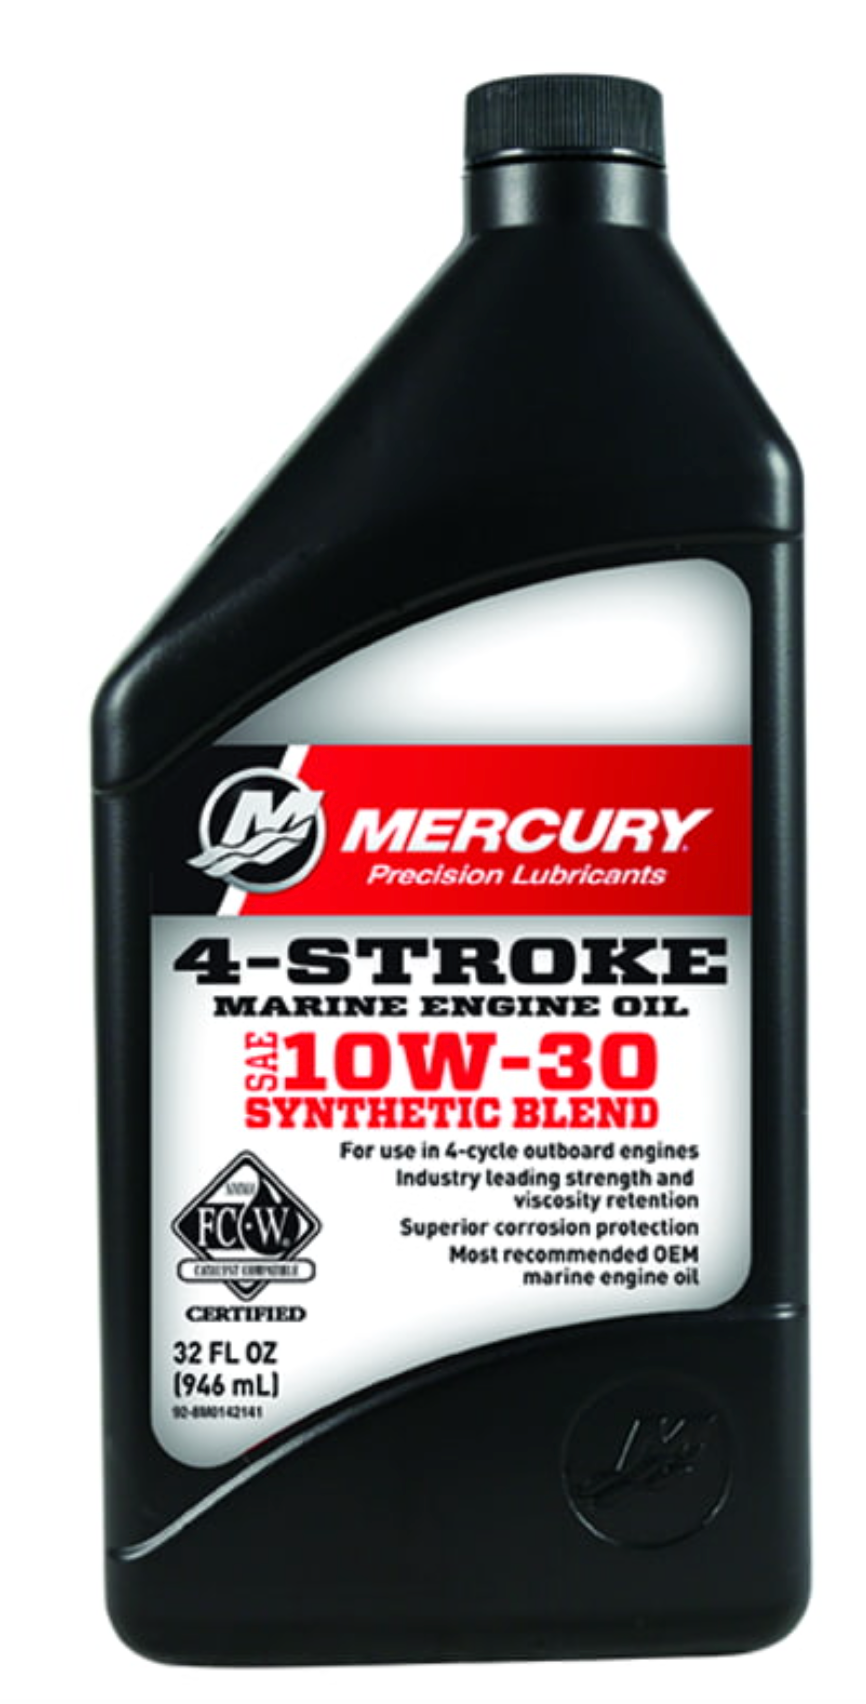 4-Stroke Marine Engine Oil SAE 10W-30 Synthetic Blend P/N: 8M0173223